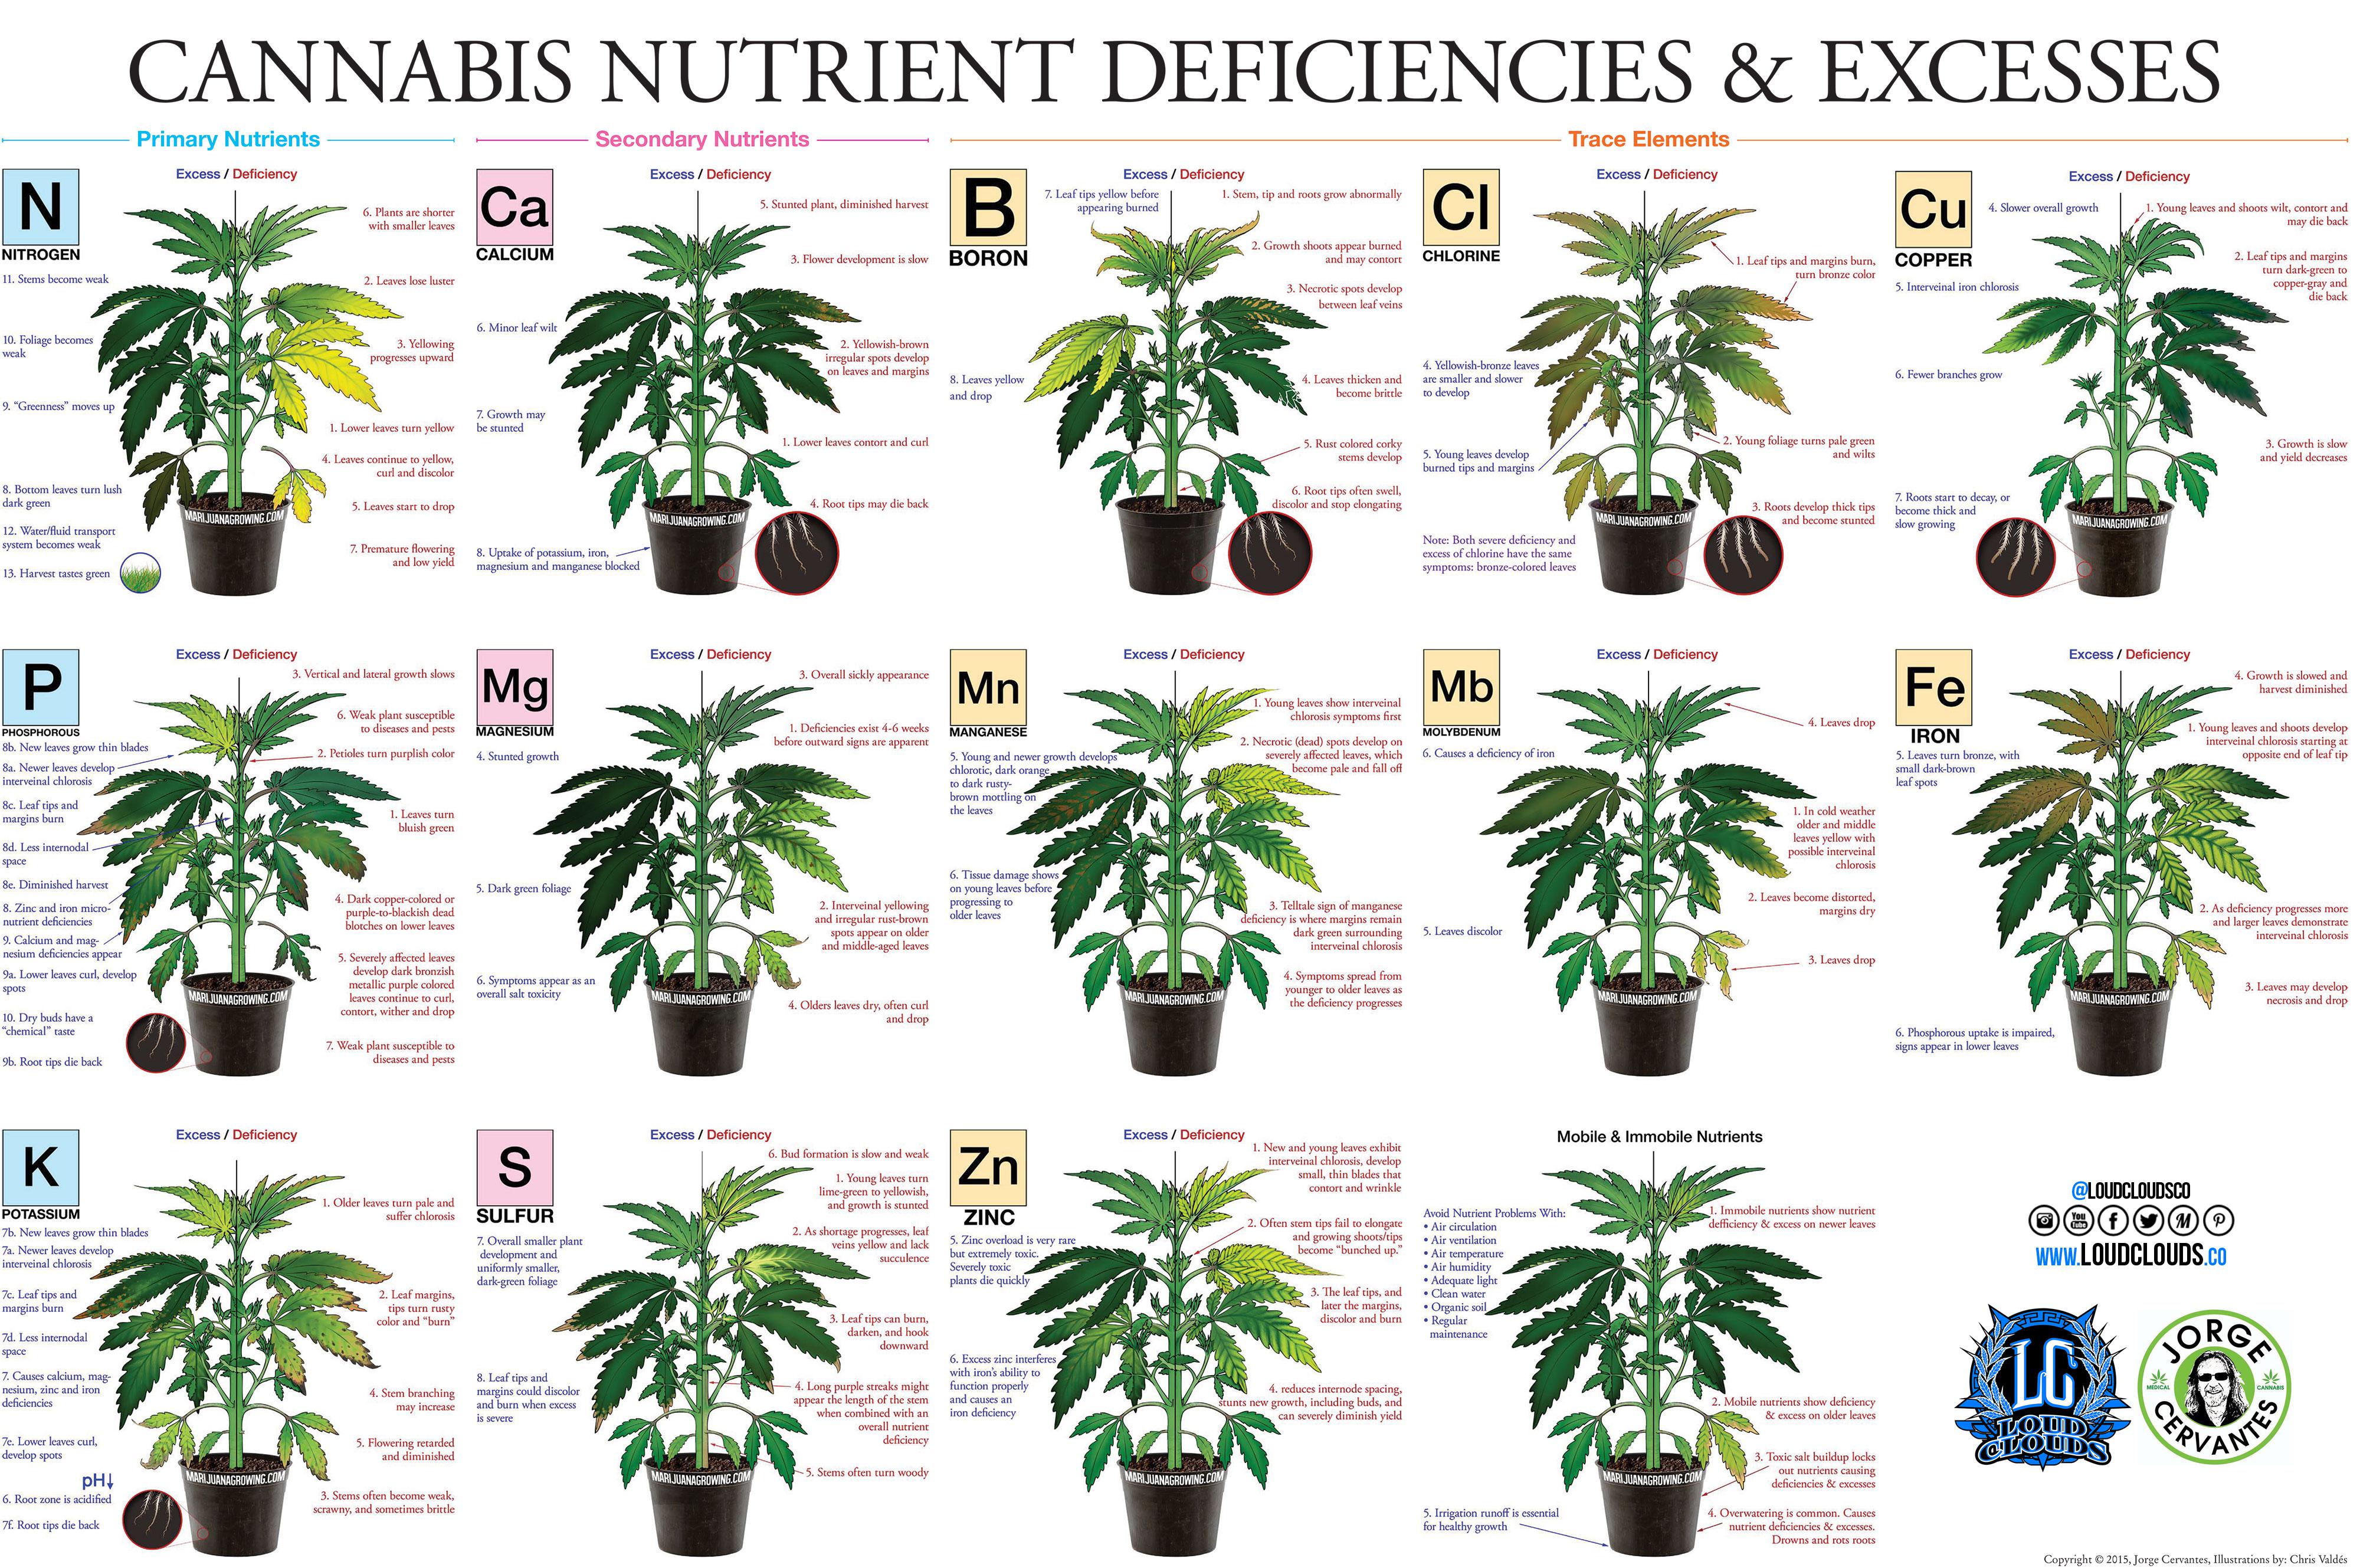 File:Whole plant nutrient deficiencies and excesses.jpeg